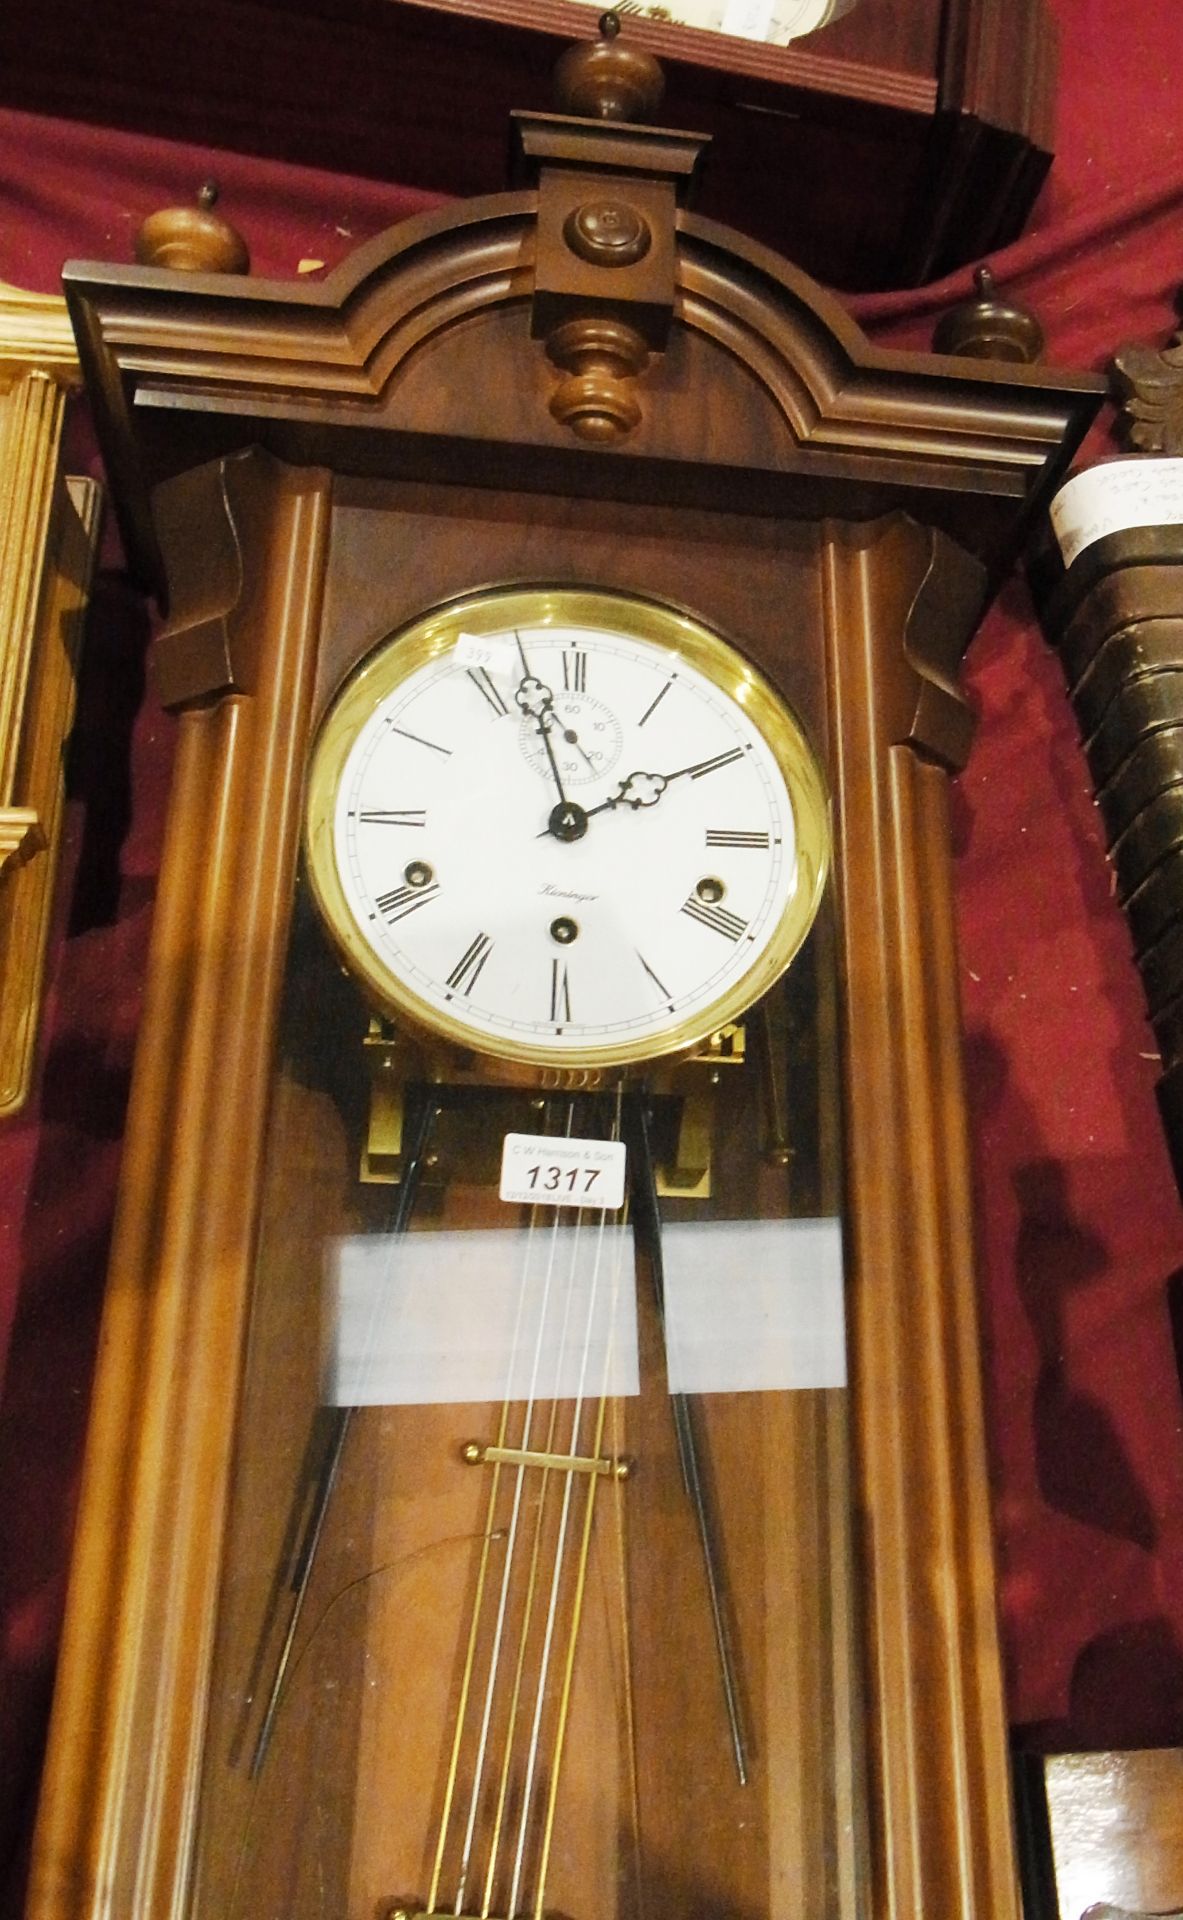 Mahogany framed glazed wall clock by Kieningen with arched pediment and embellishments with key,